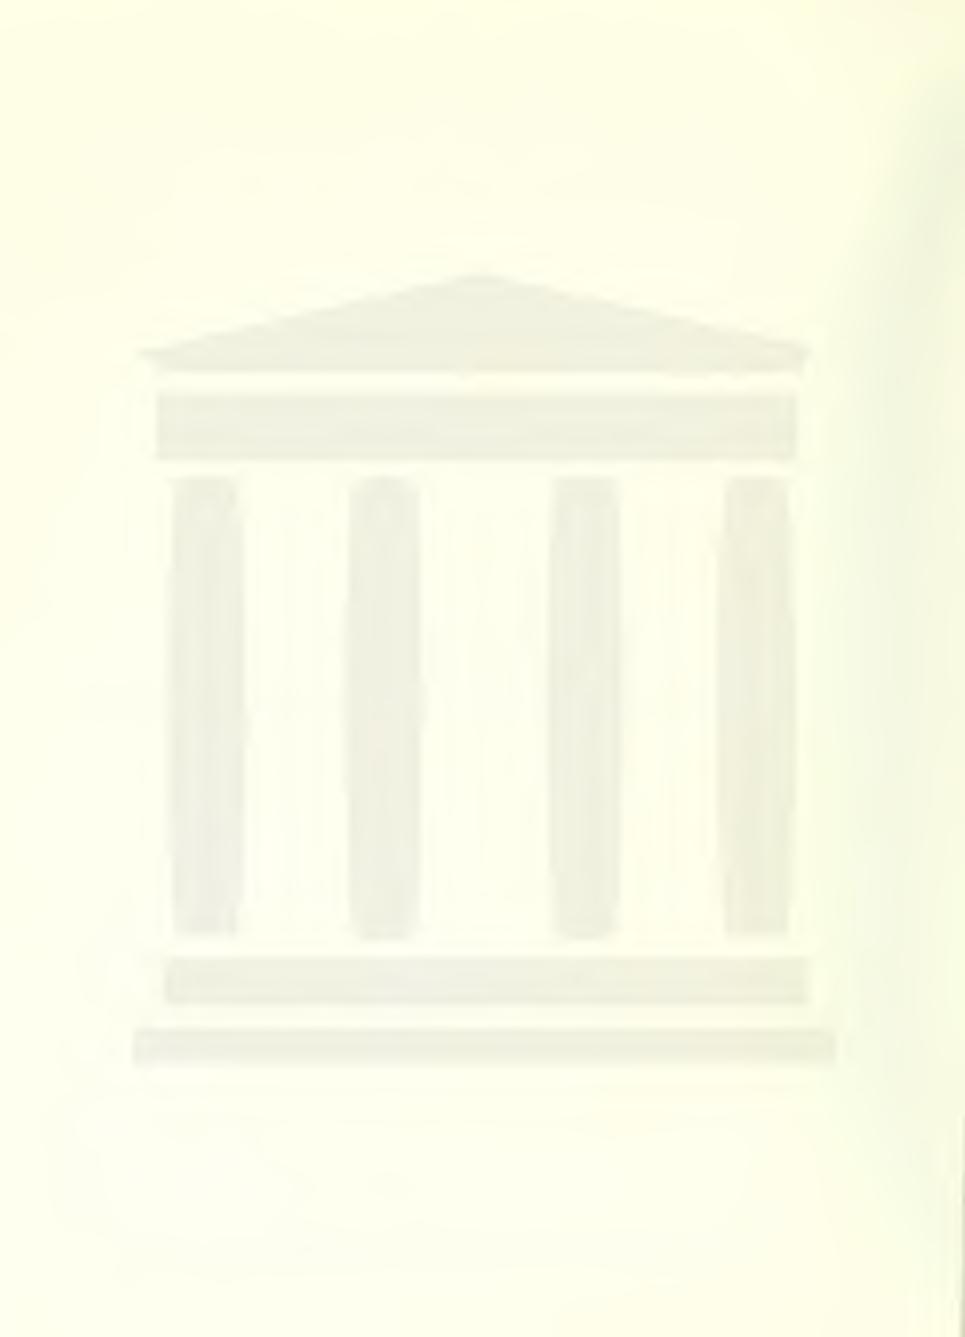 Digitized by the Internet Archive in 2011